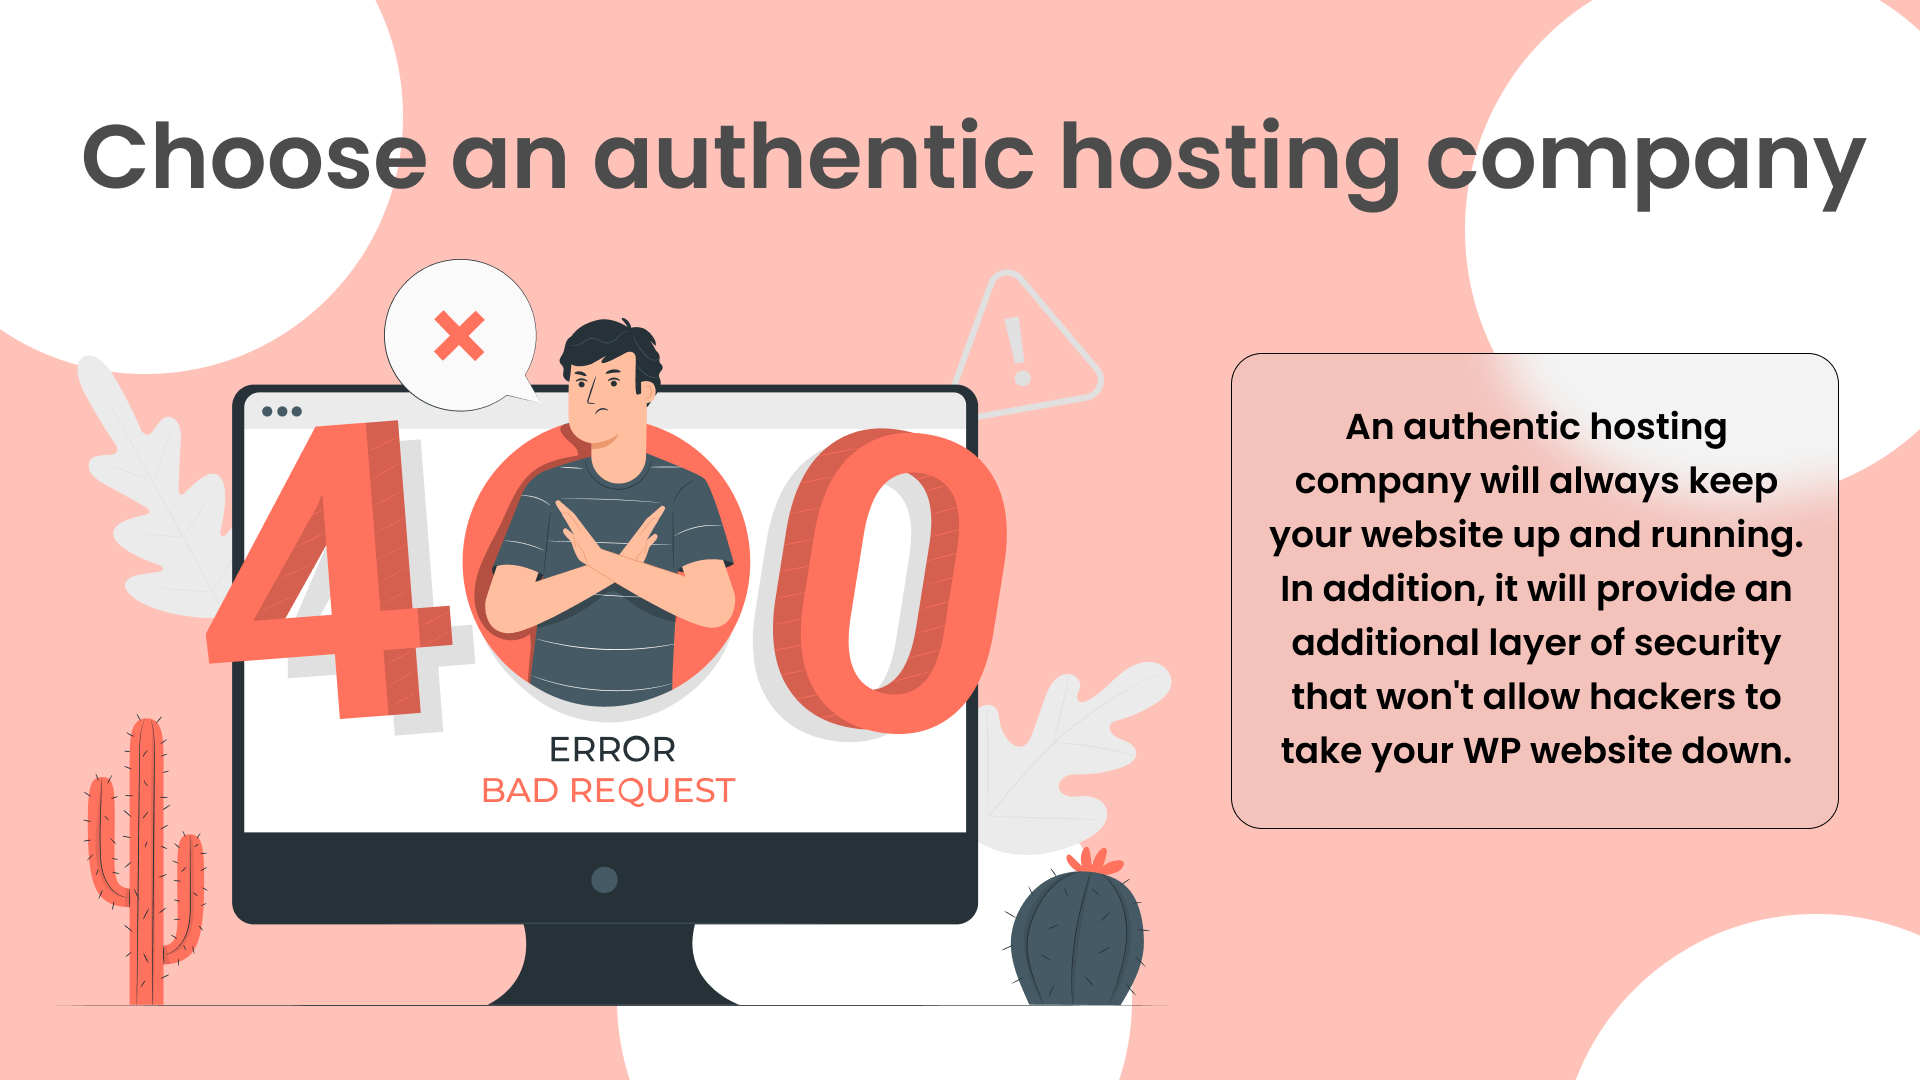 Choose an authentic hosting company